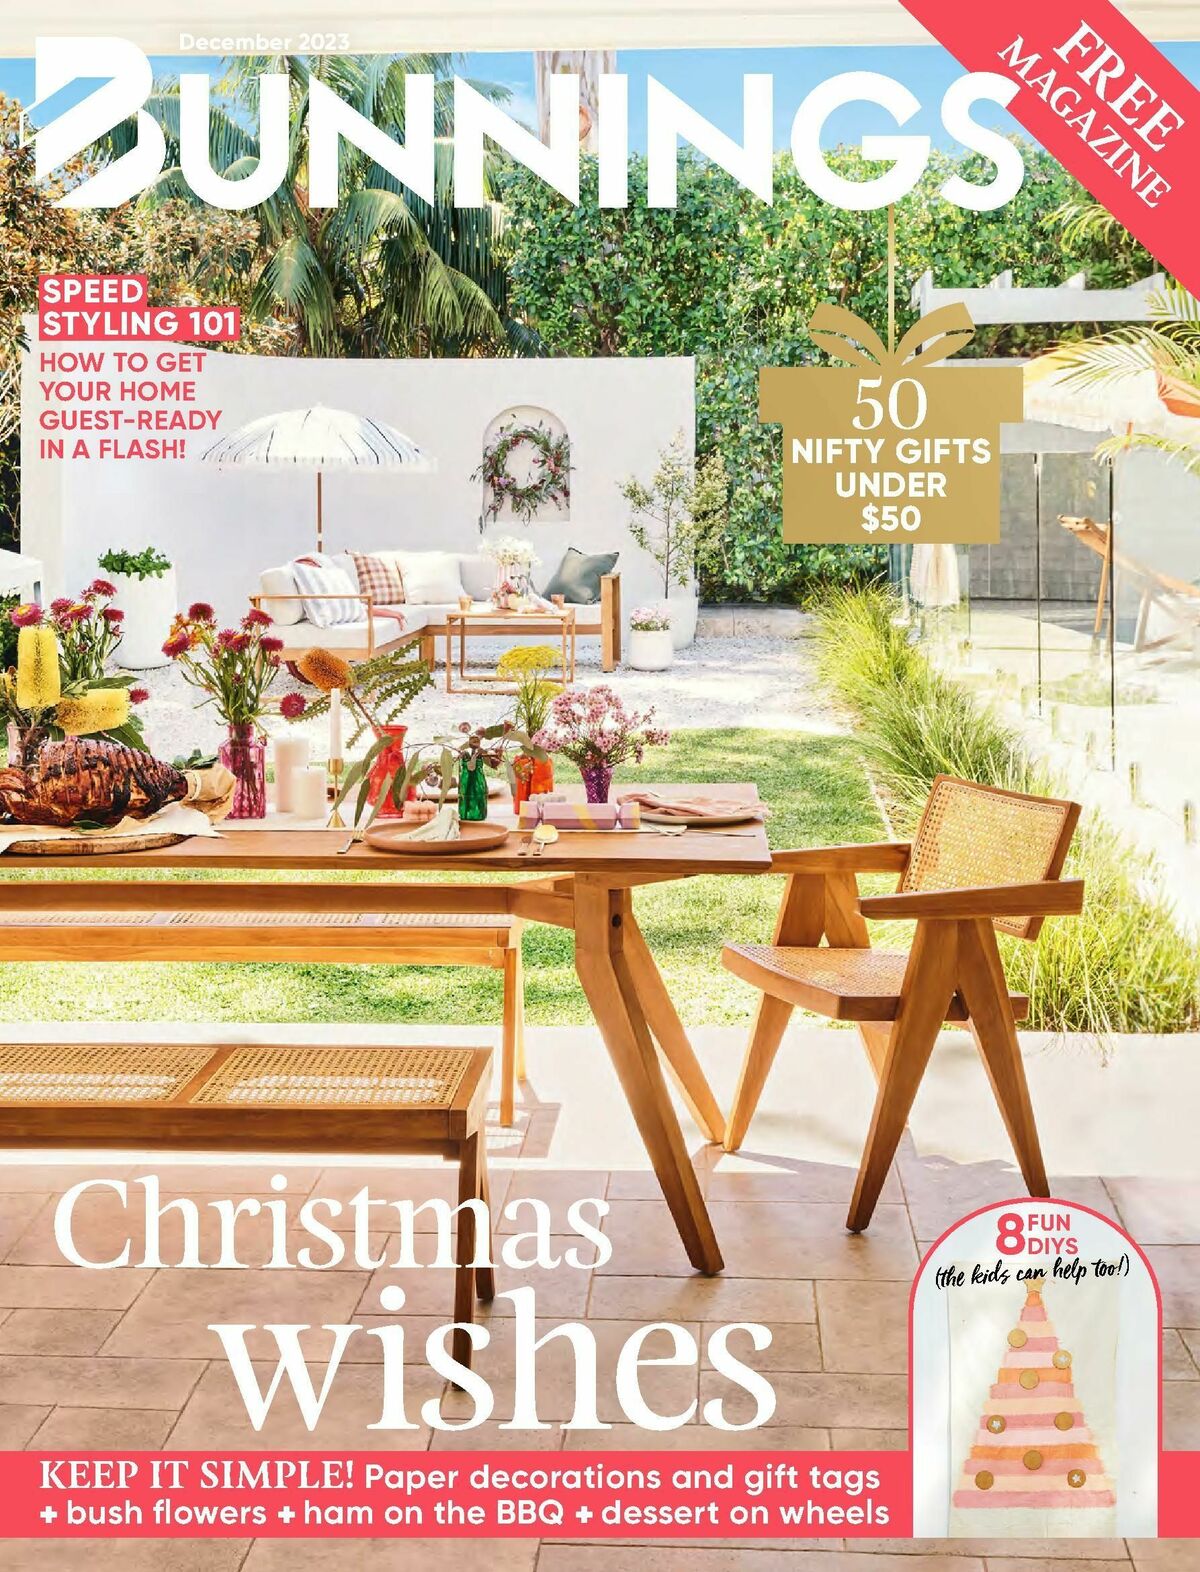 Bunnings Warehouse Magazine December Catalogues from 1 December